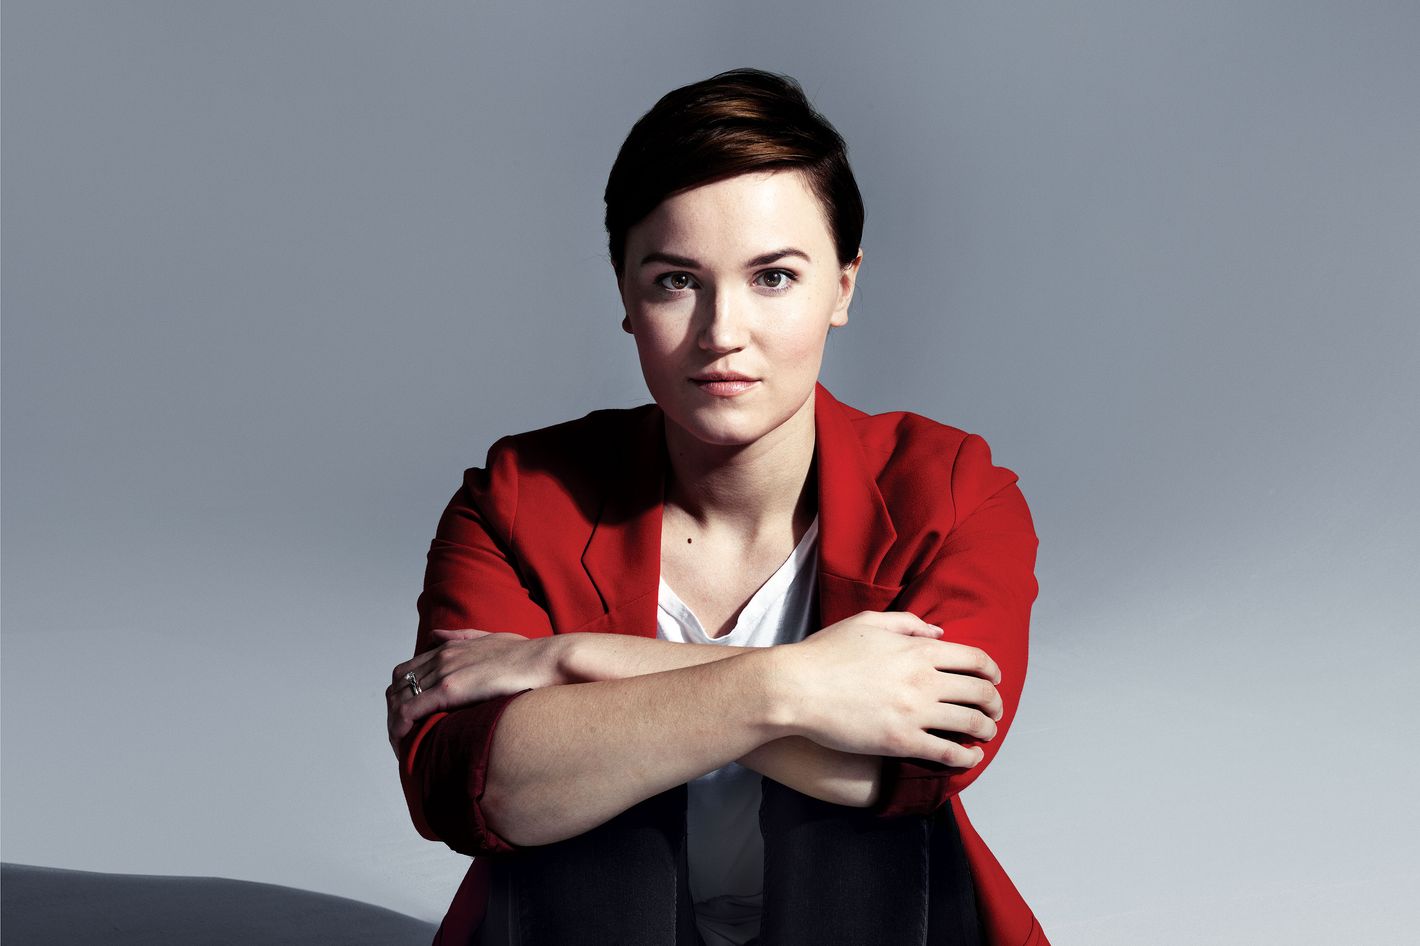 veronica roth divergent signing